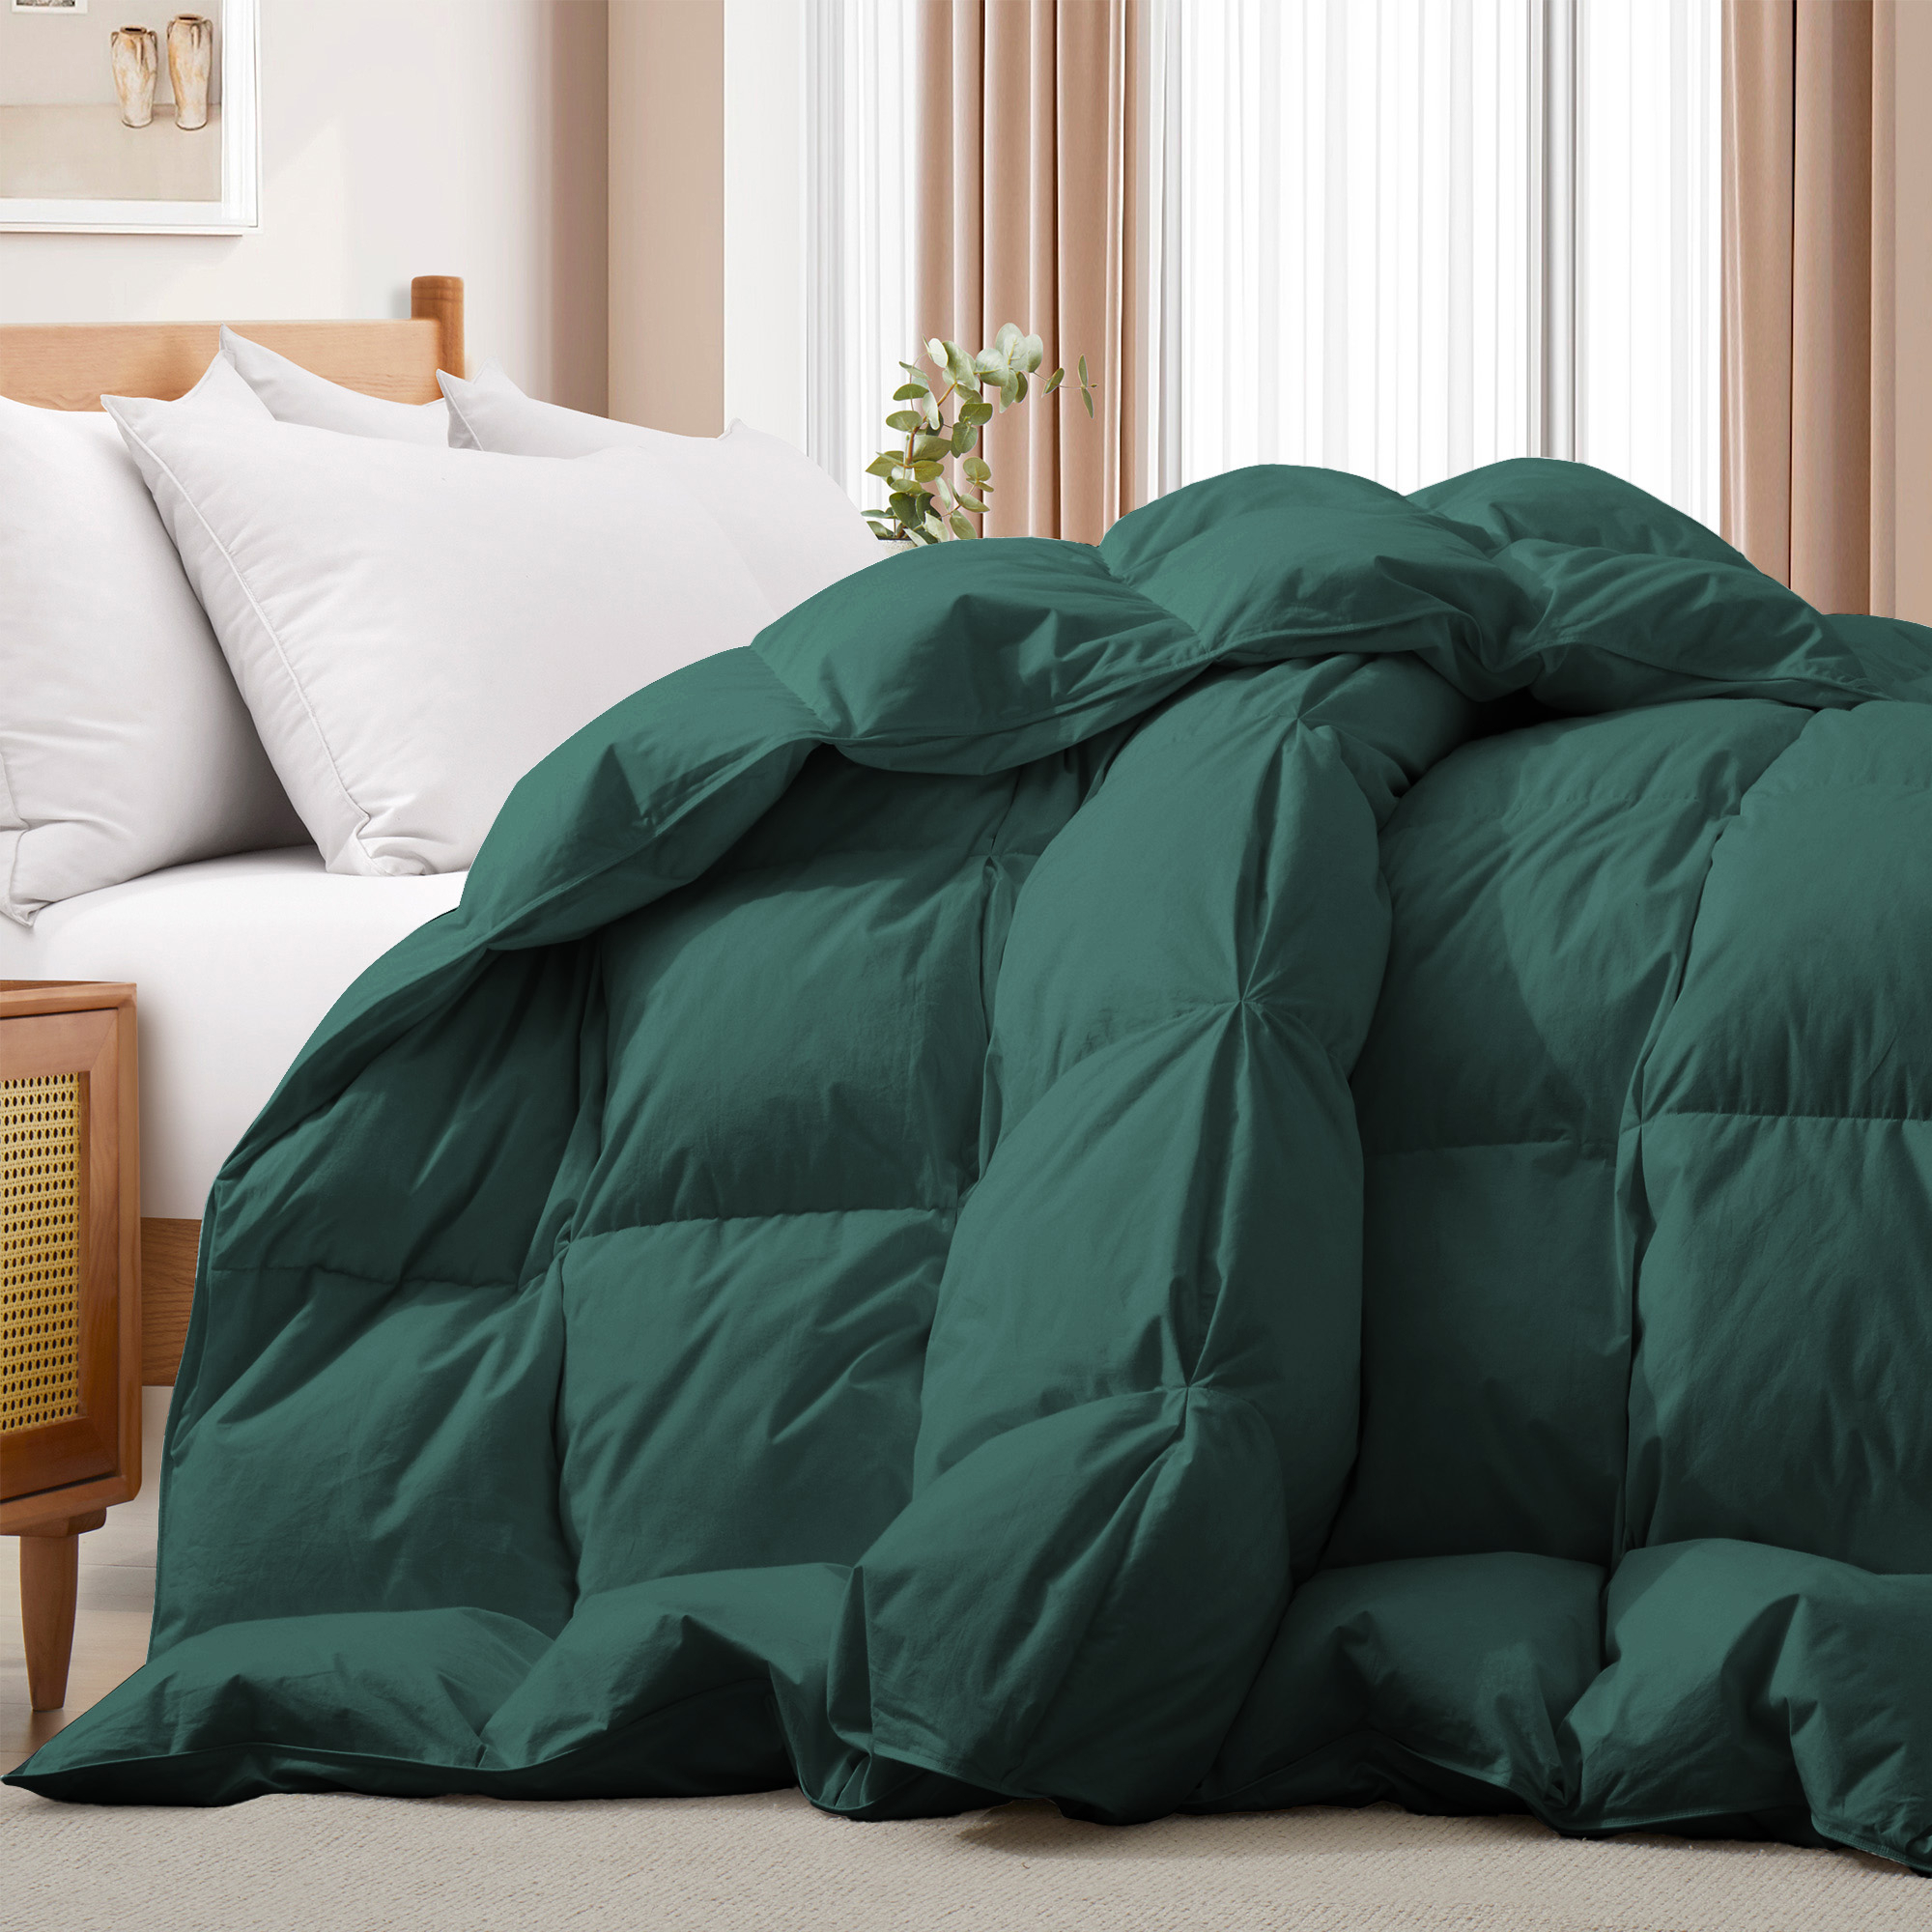 Premium Goose Feather And Down Duvet Insert -All Season Comforter With Breathable Cotton Cover - Twin-68*90